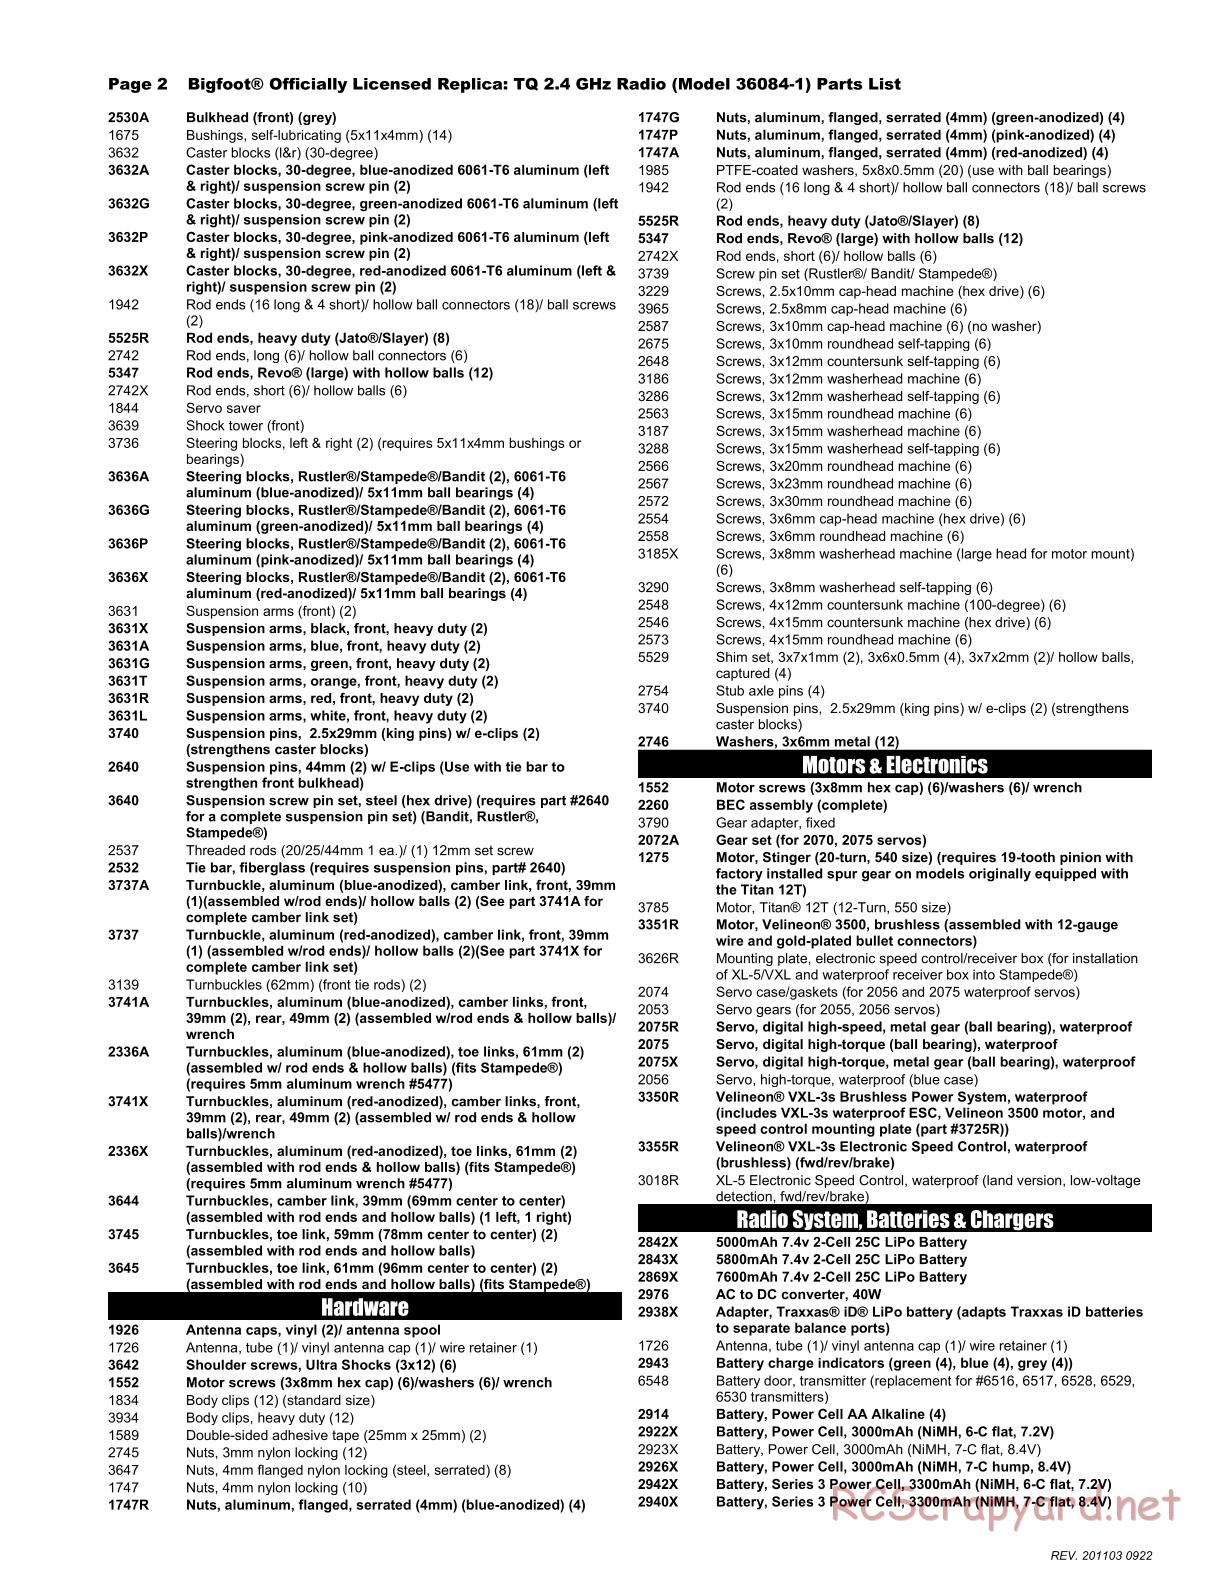 Traxxas - Bigfoot - Parts List - Page 2